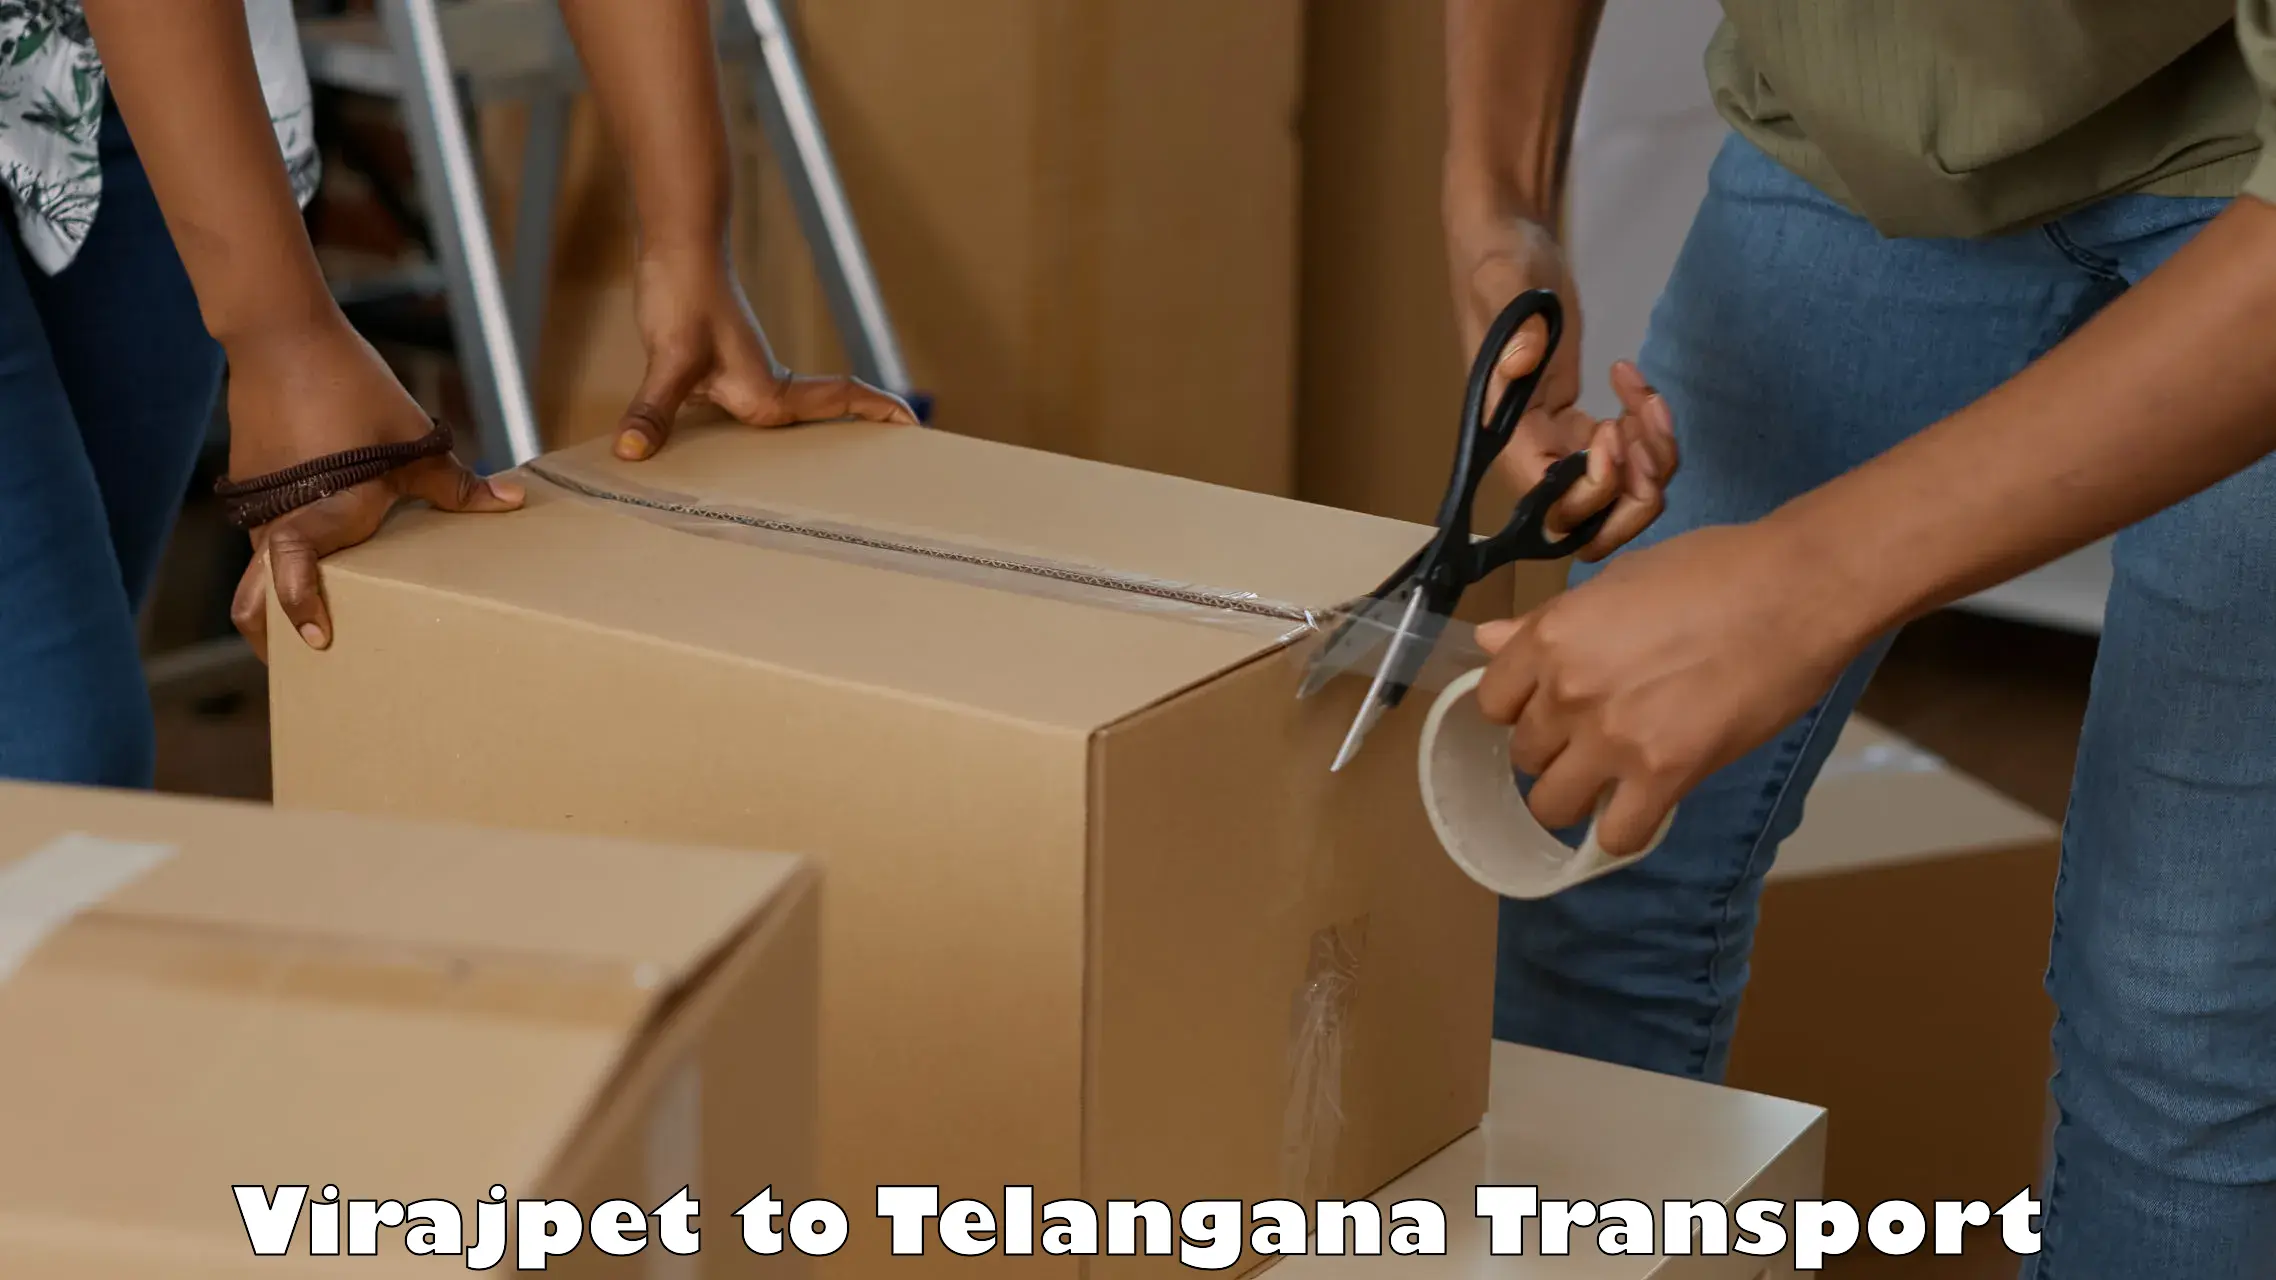 Commercial transport service Virajpet to Telangana